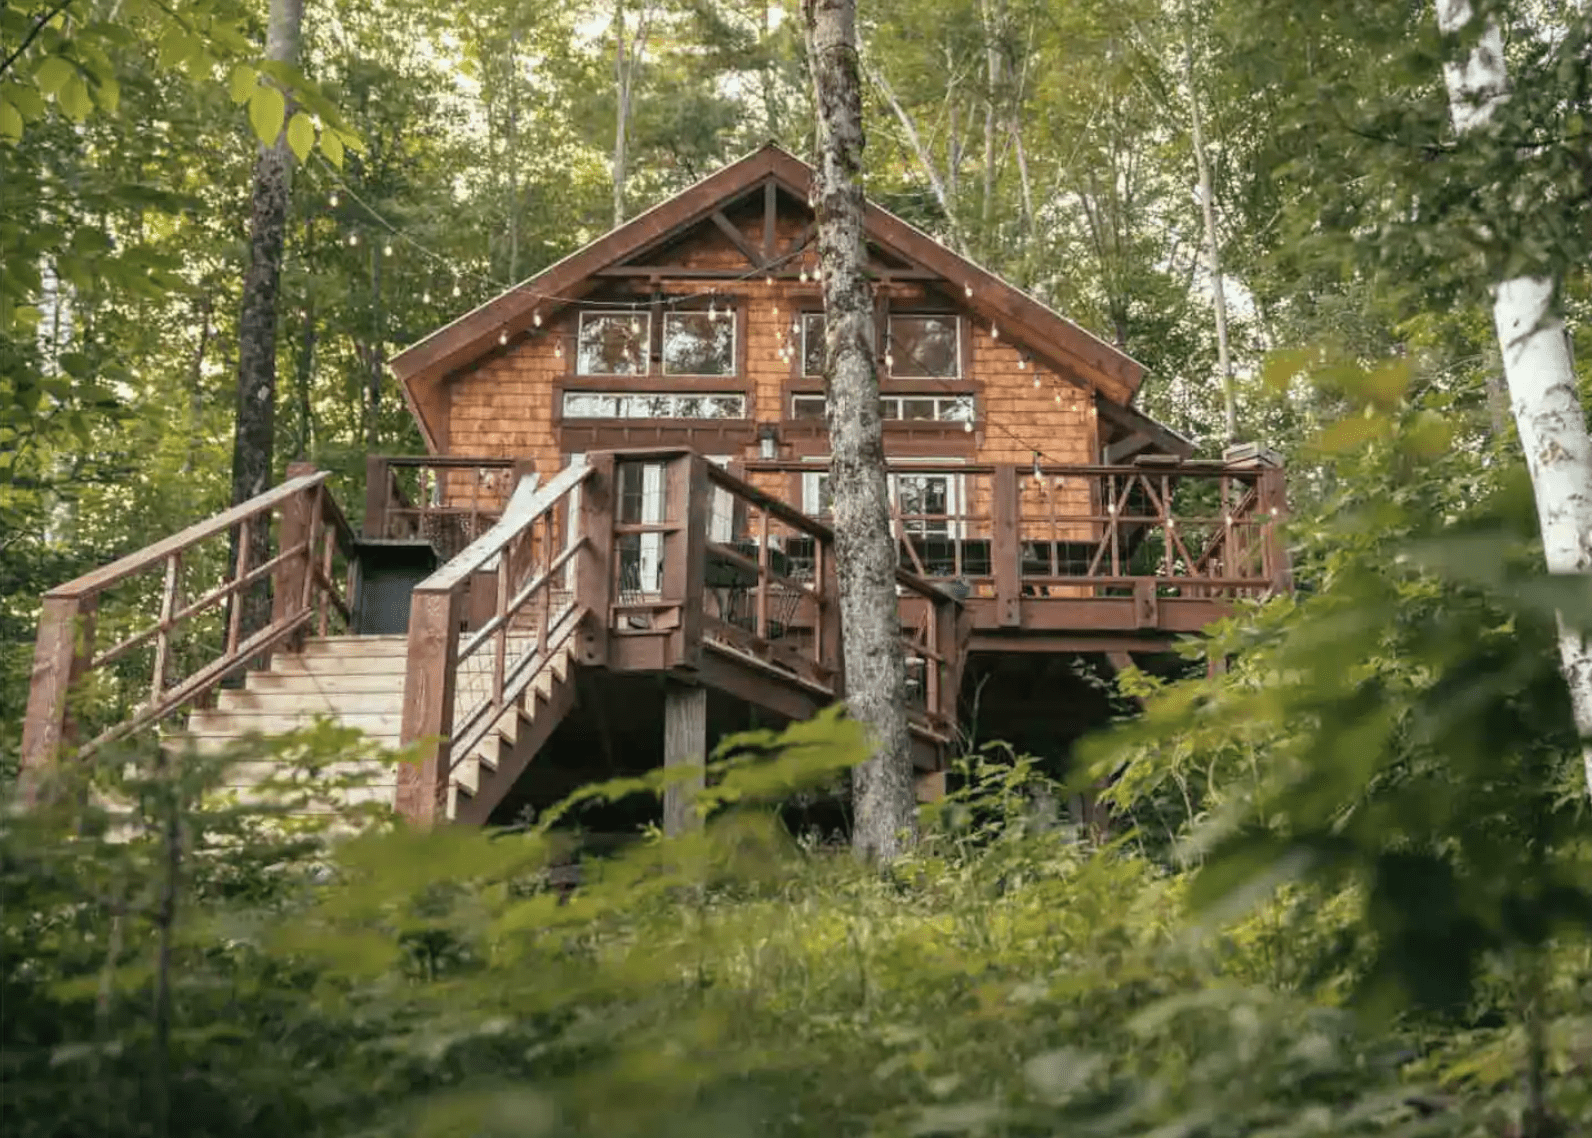 Wooden treehouse surrounded by the woods with a large walk up staircase.